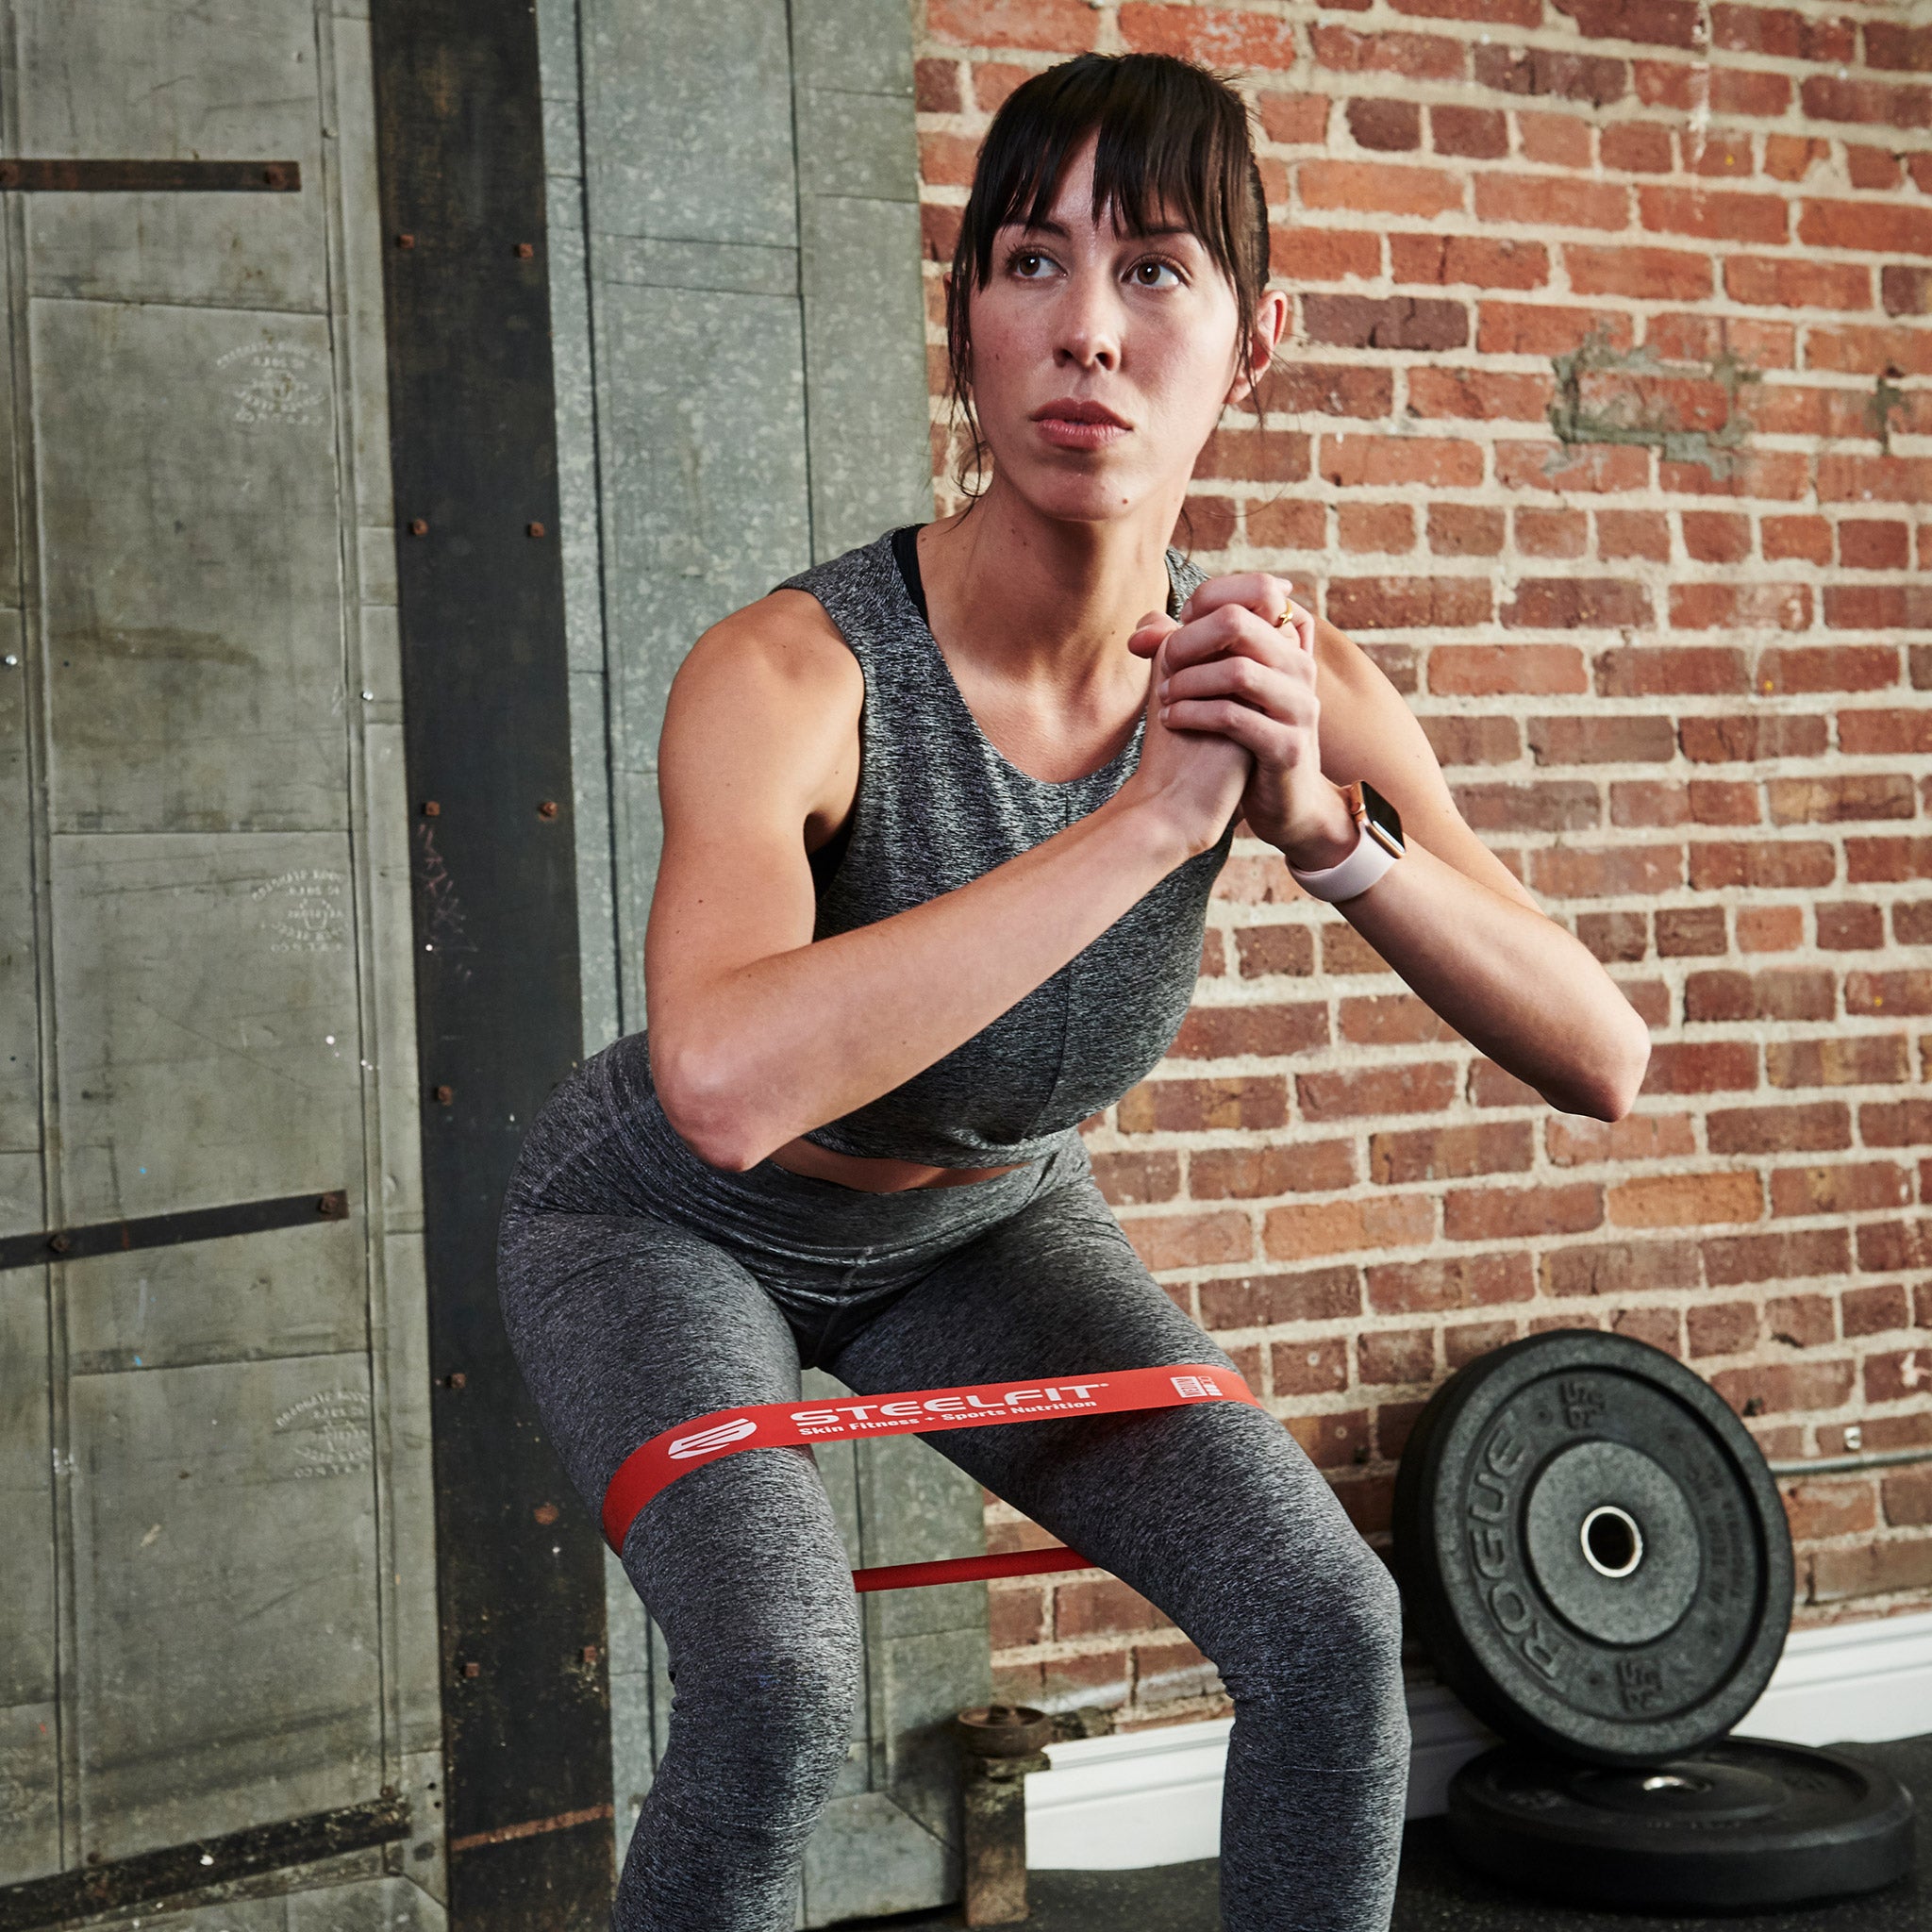 SteelFit’s Mini Loop Bands for home & gym workouts in 5 different levels of resistance